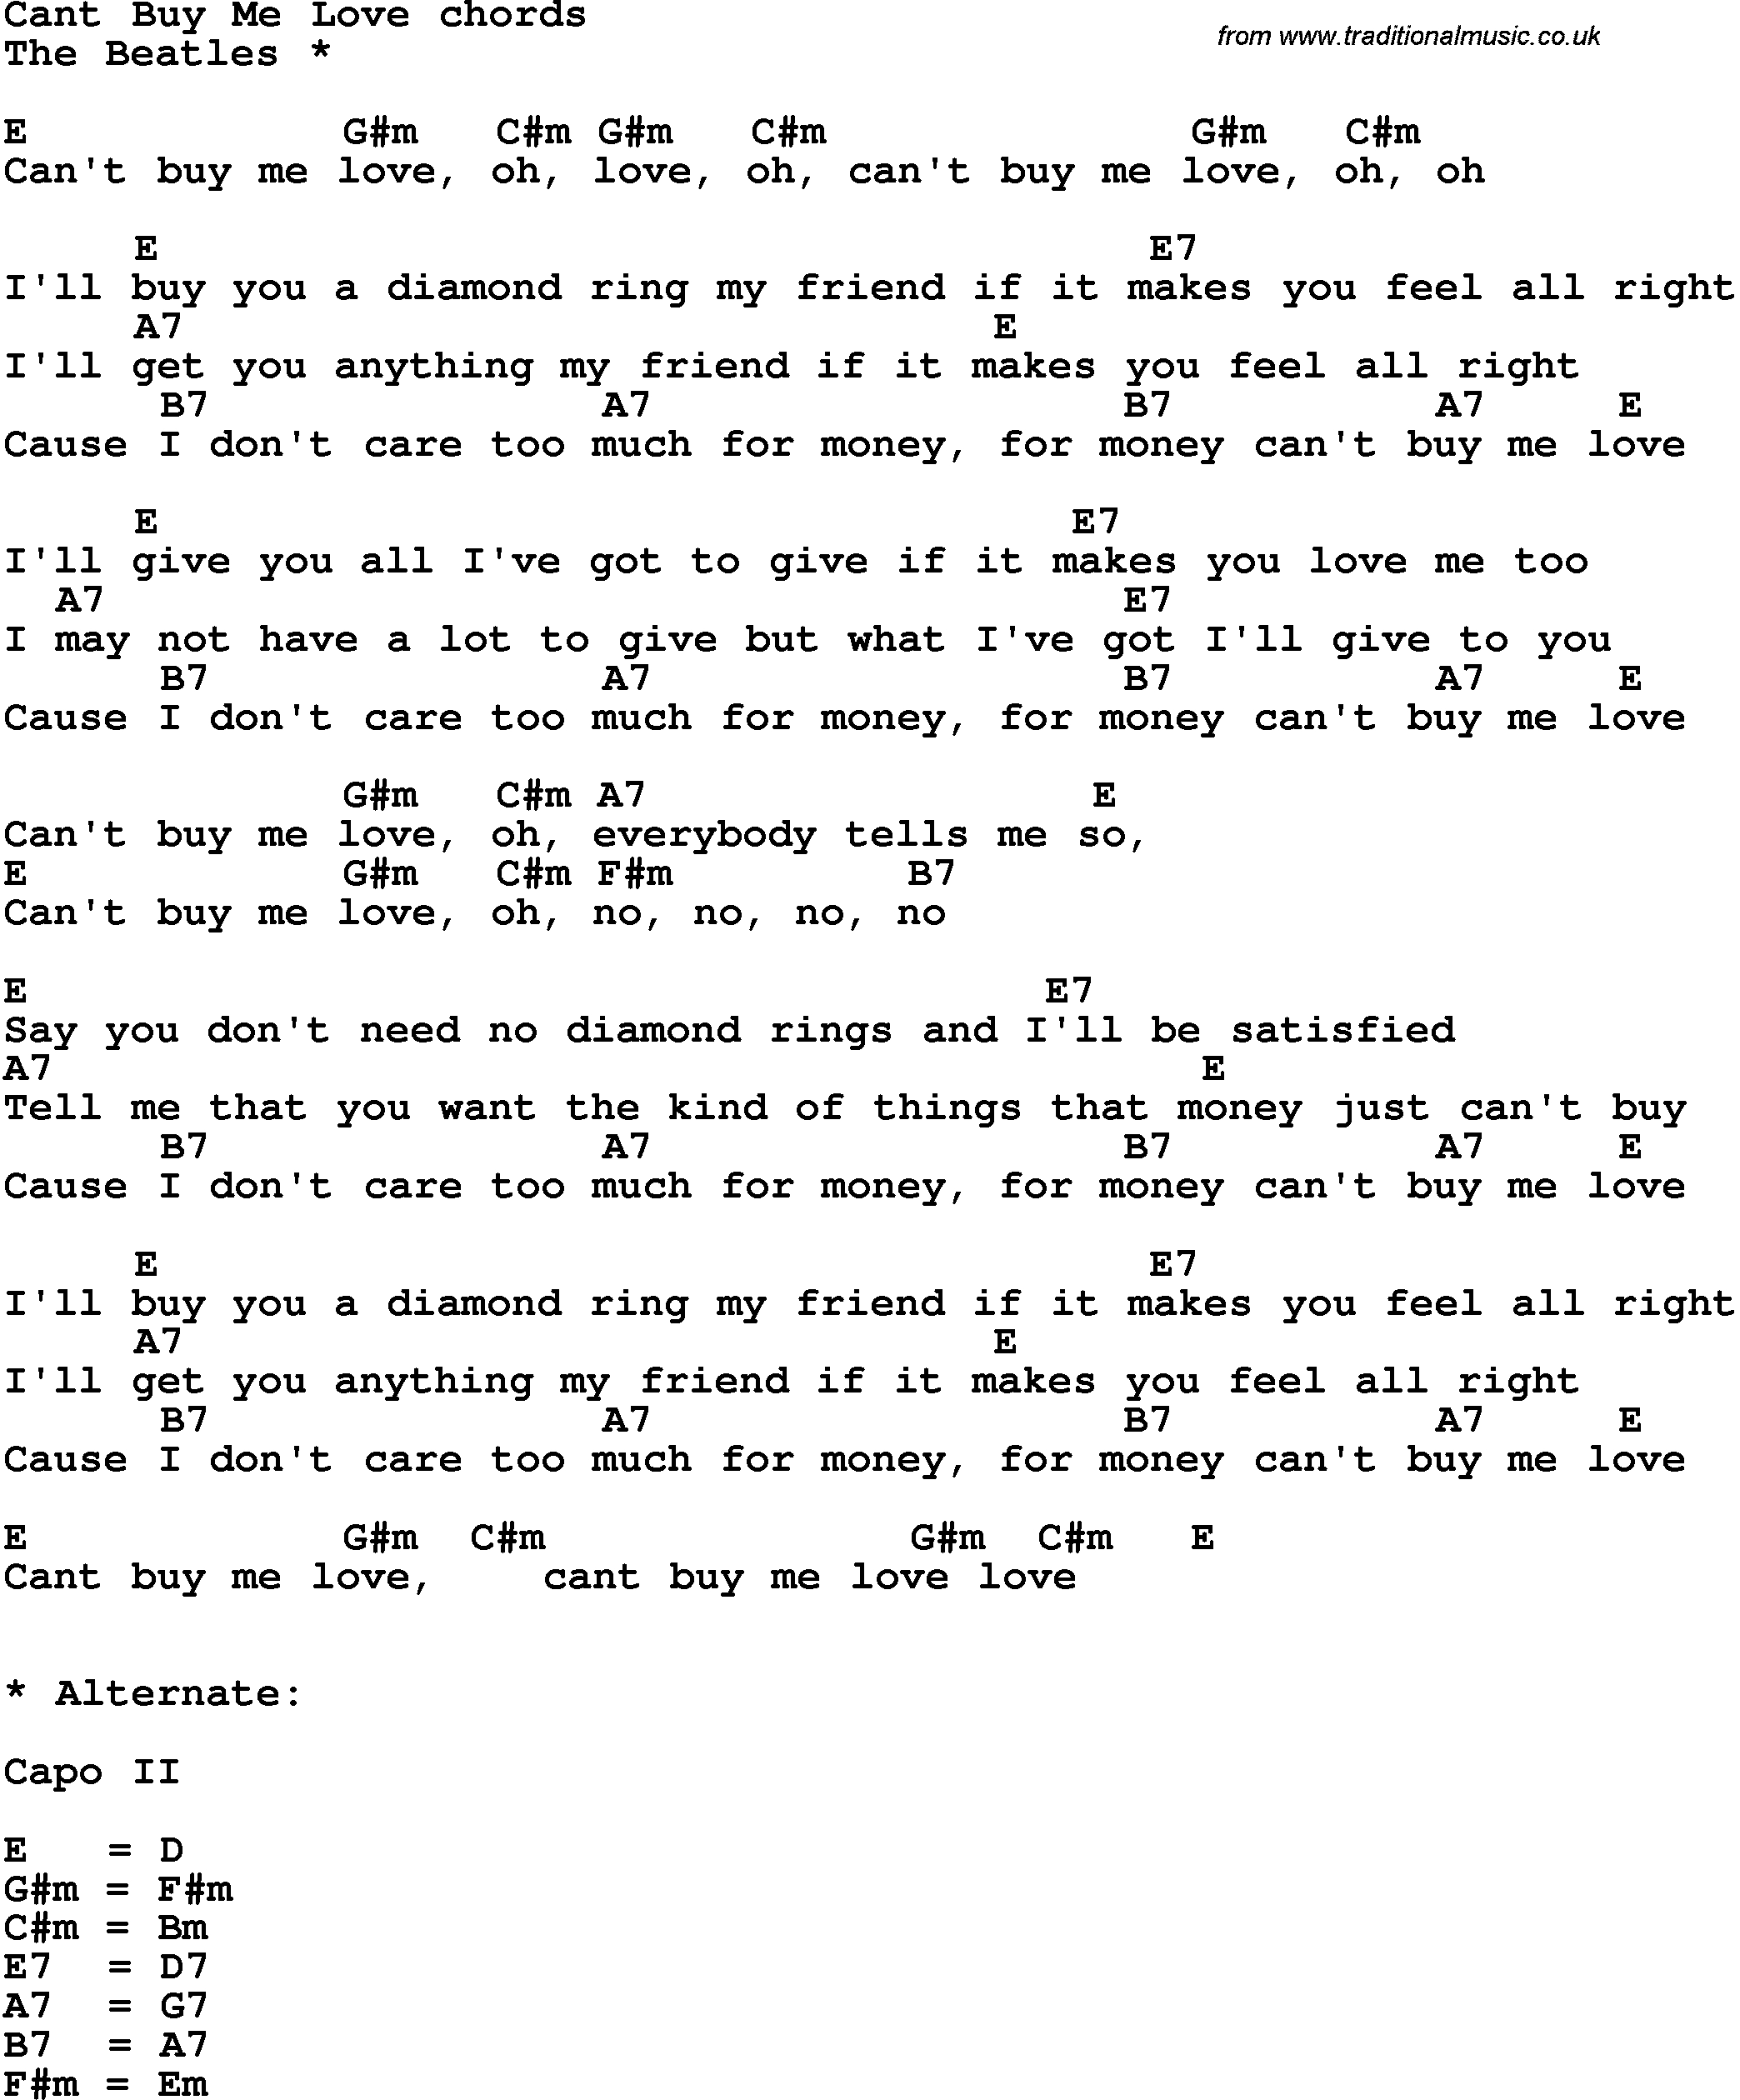 Make You Feel My Love Chords Song Lyrics With Guitar Chords For Cant Buy Me Love The Beatles